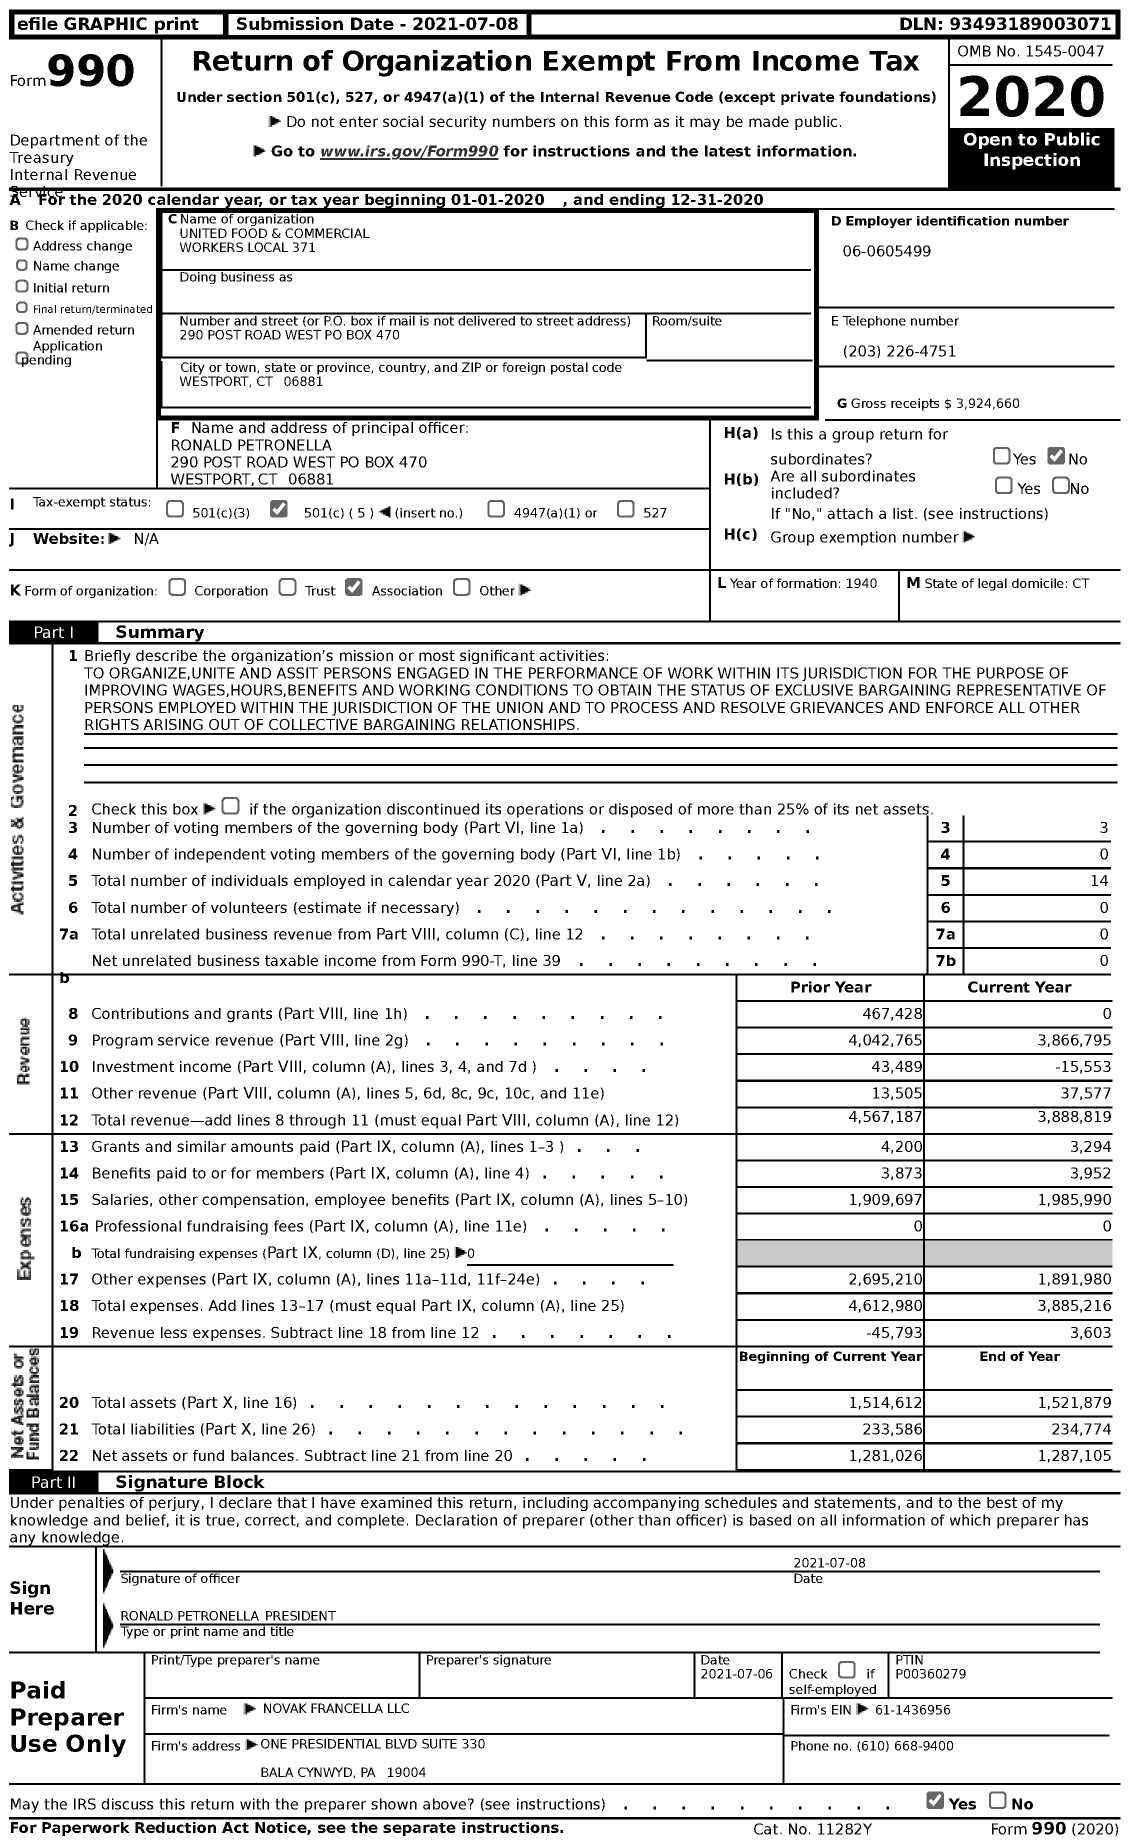 Image of first page of 2020 Form 990 for United Food & Commercial Workers Union - 371 Local